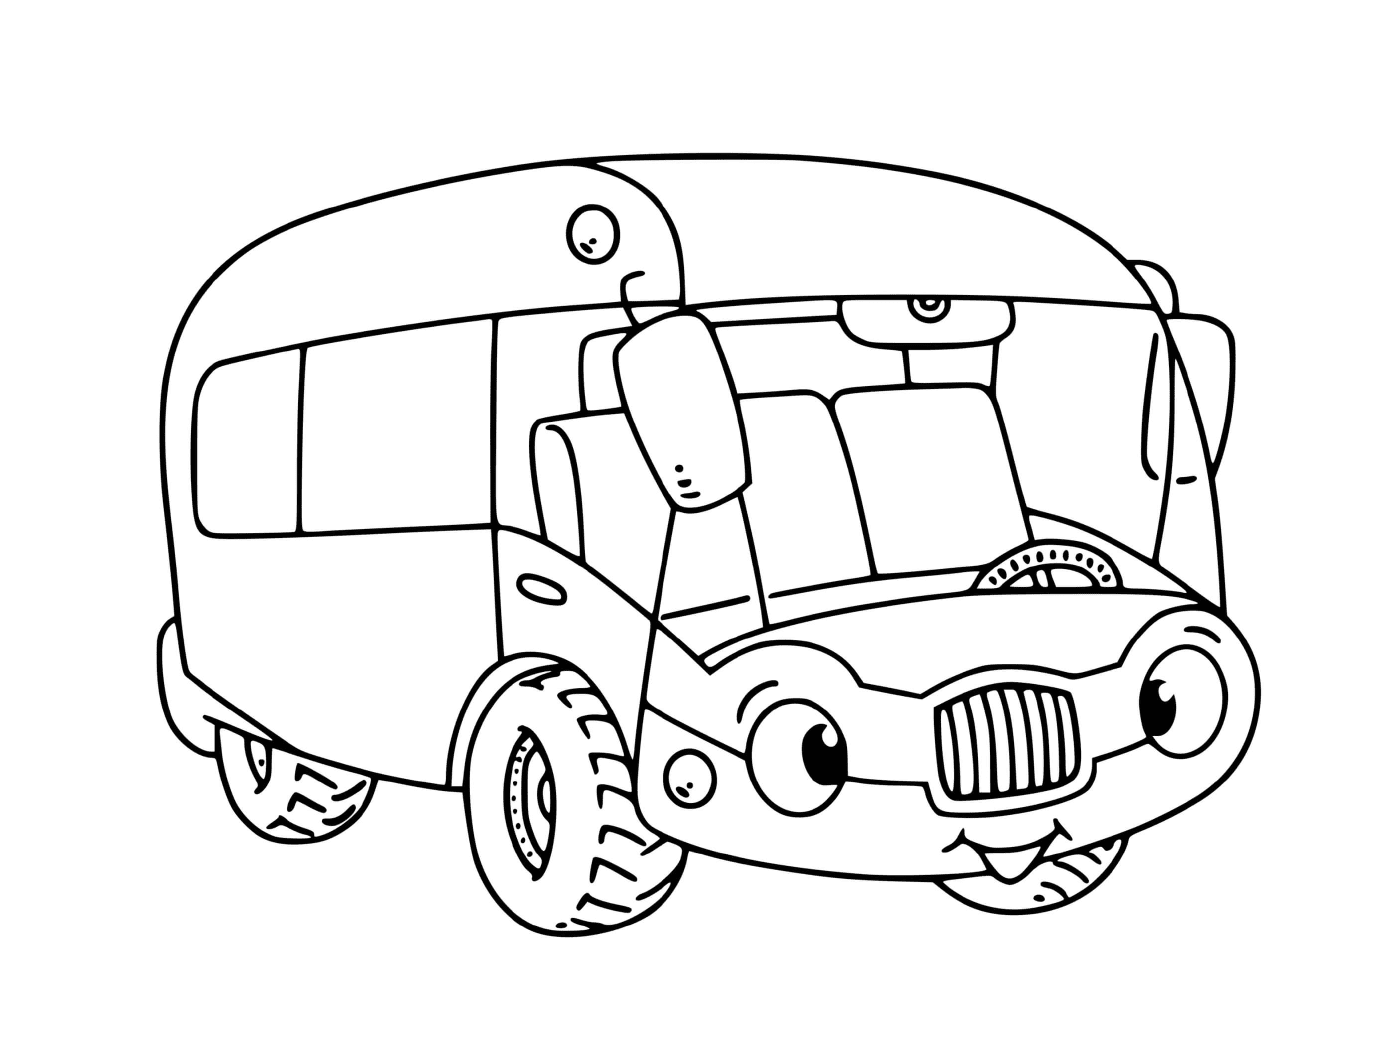  Transportation of children to school: the bus 